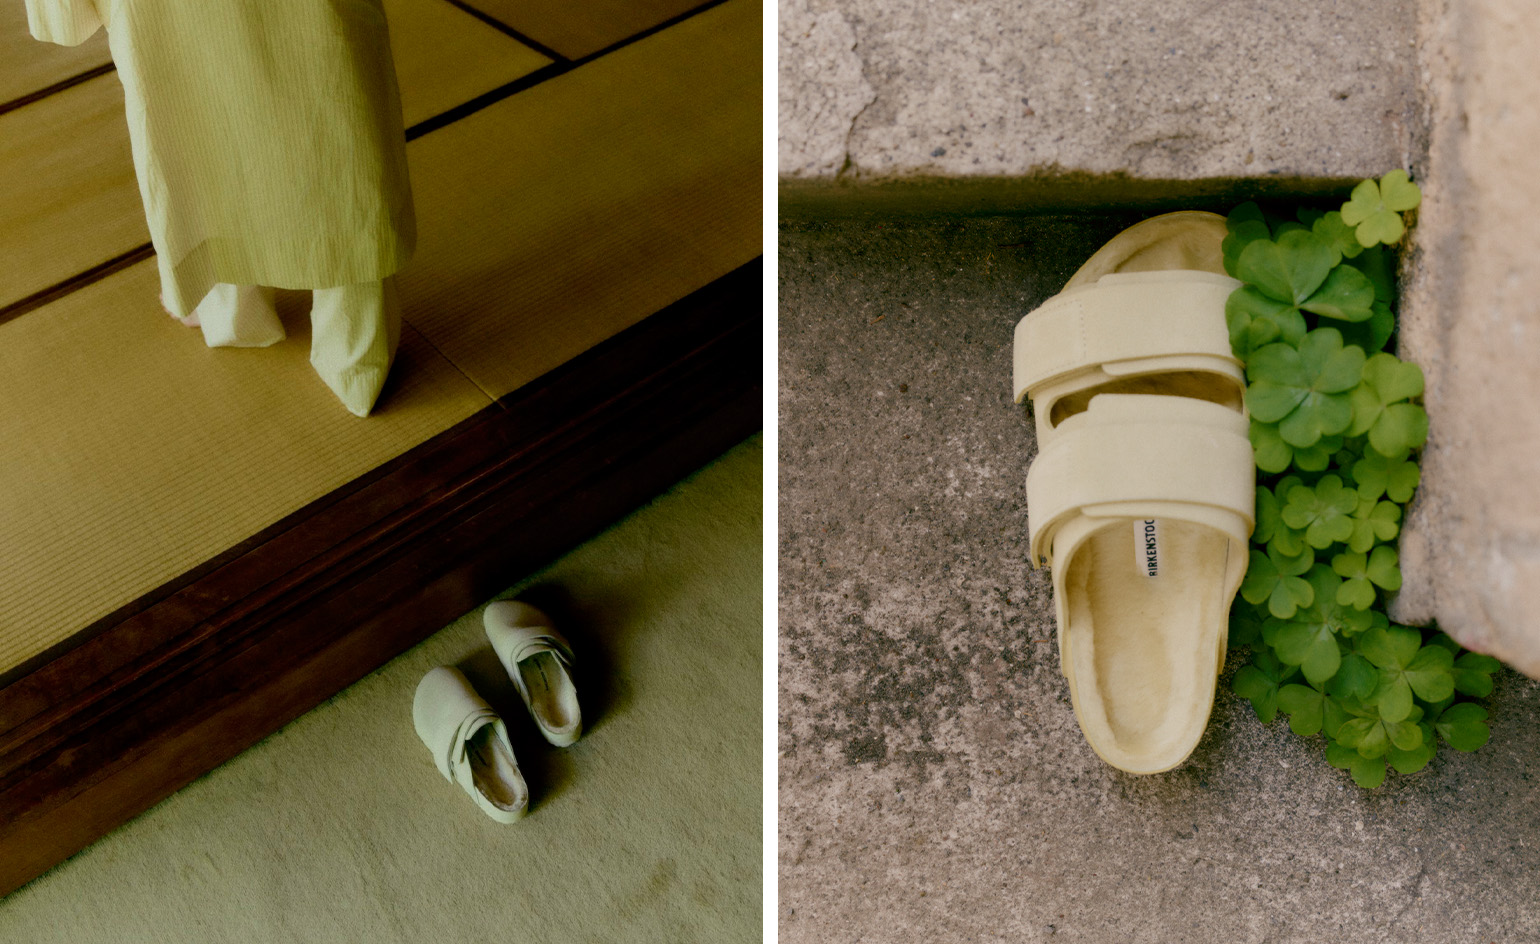 Birkenstock has united with Tekla on a collection for home